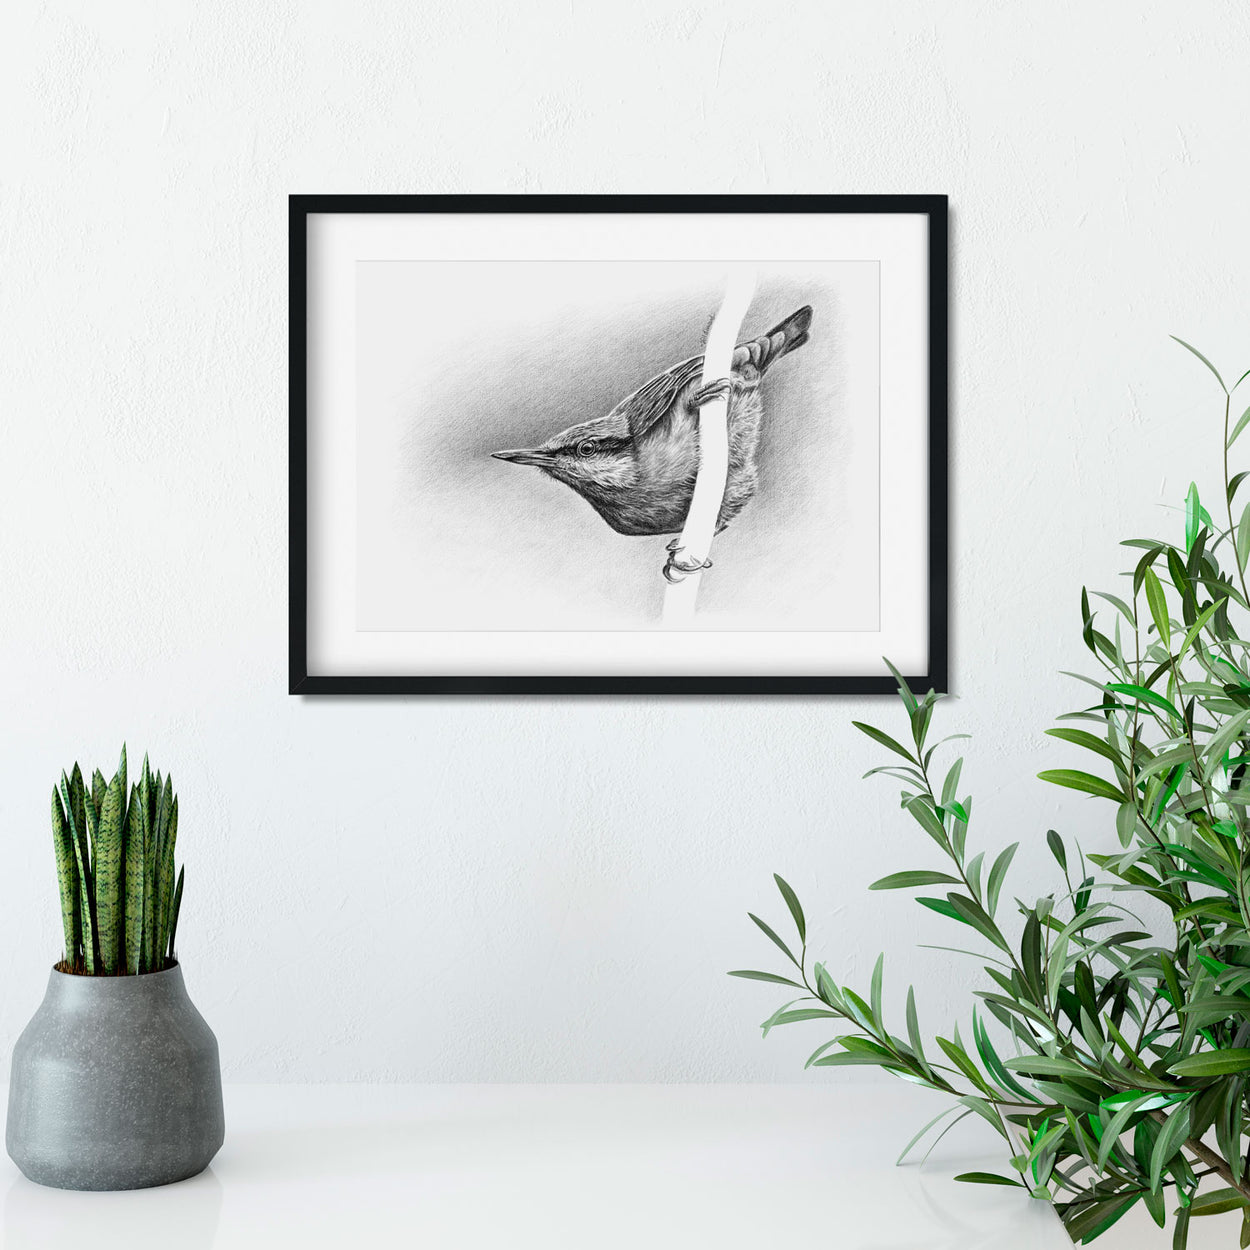 Nuthatch Drawing Frame on Wall - The Thriving Wild